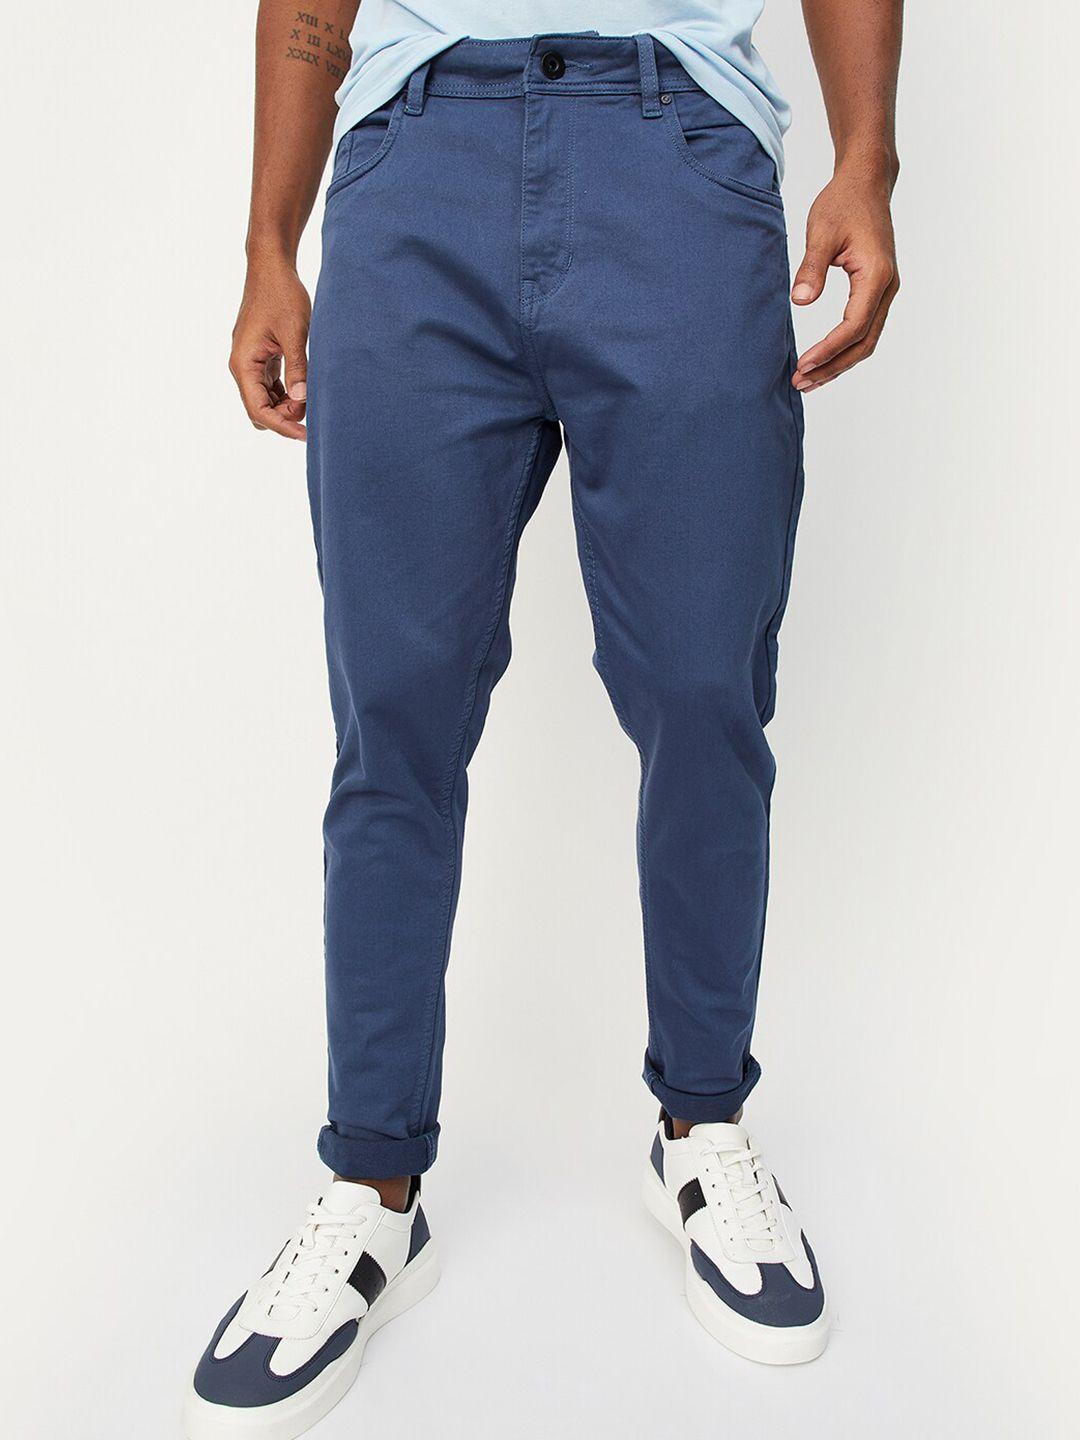 max men mid-rise clean look jeans